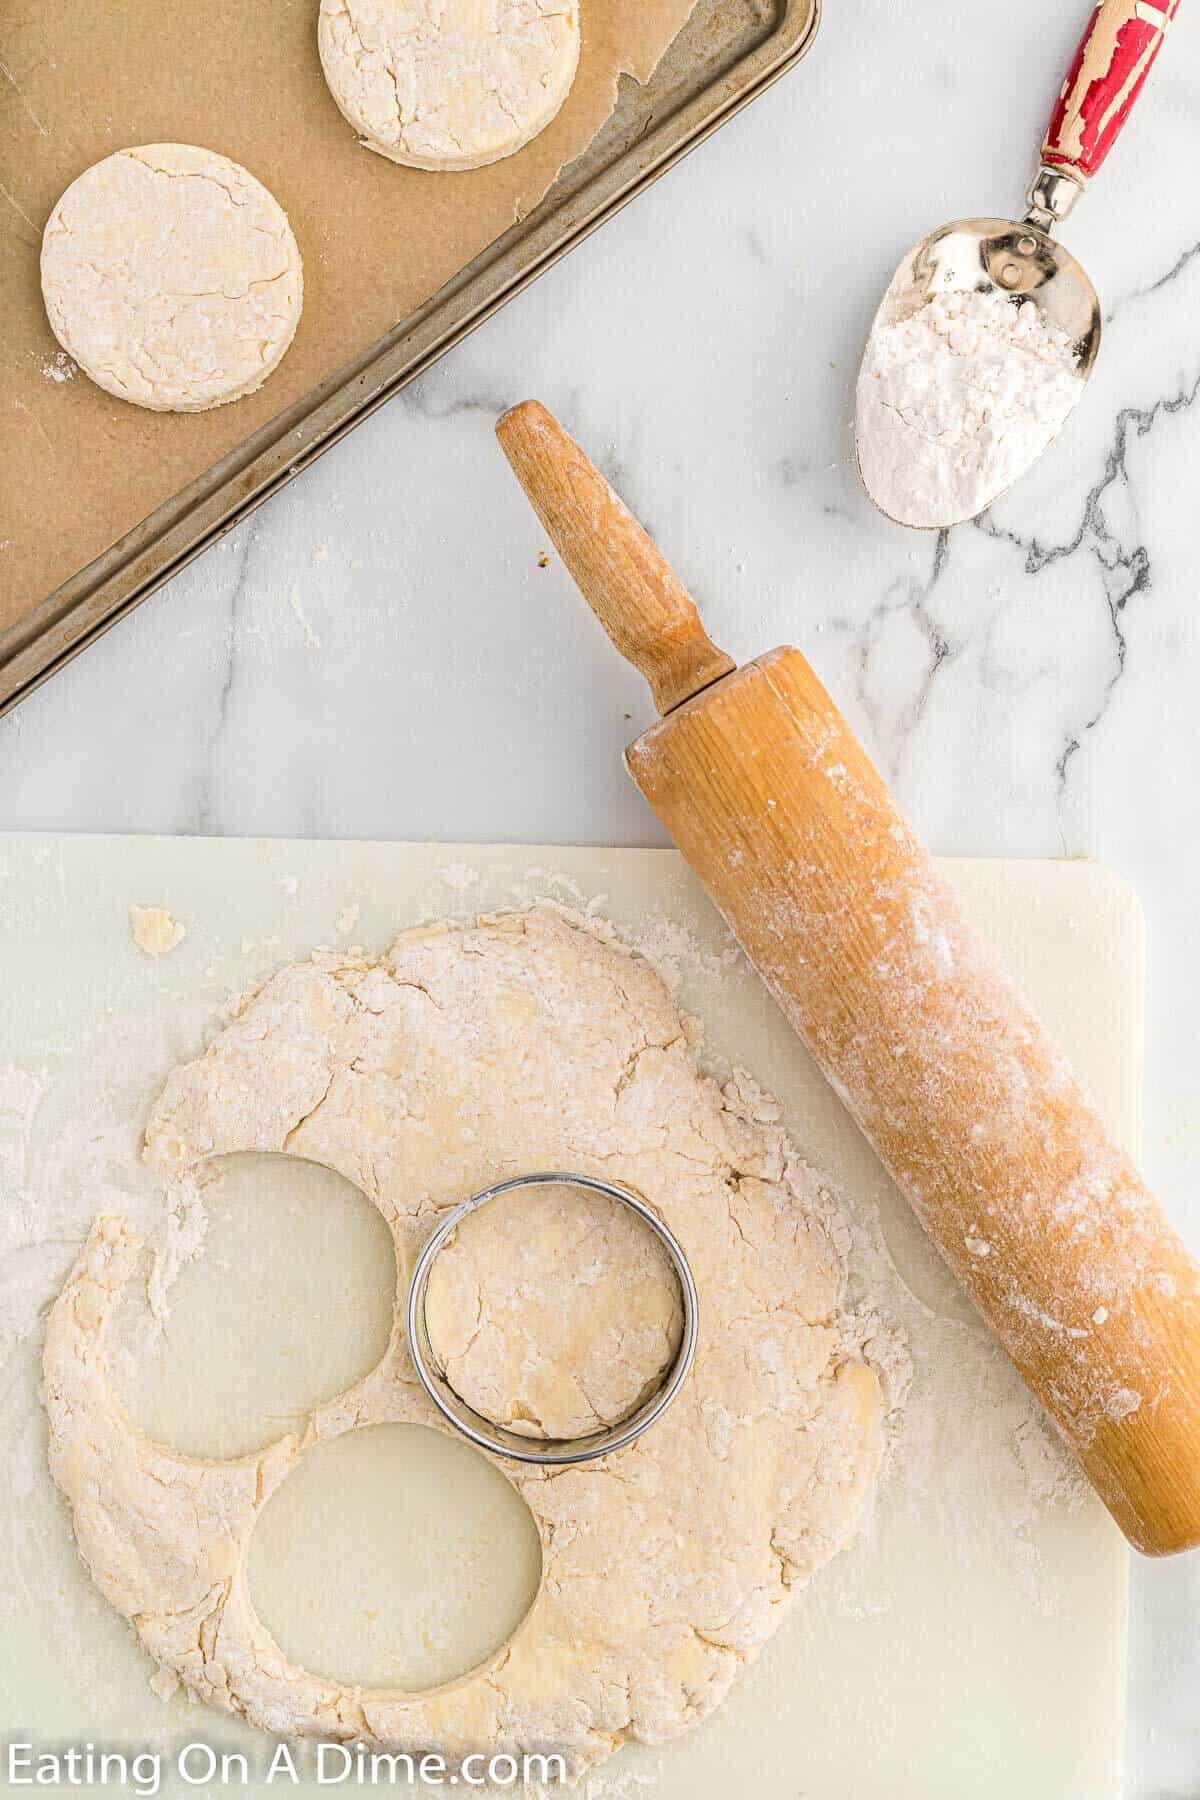 Using a biscuit cutting to cut the dough into round circles